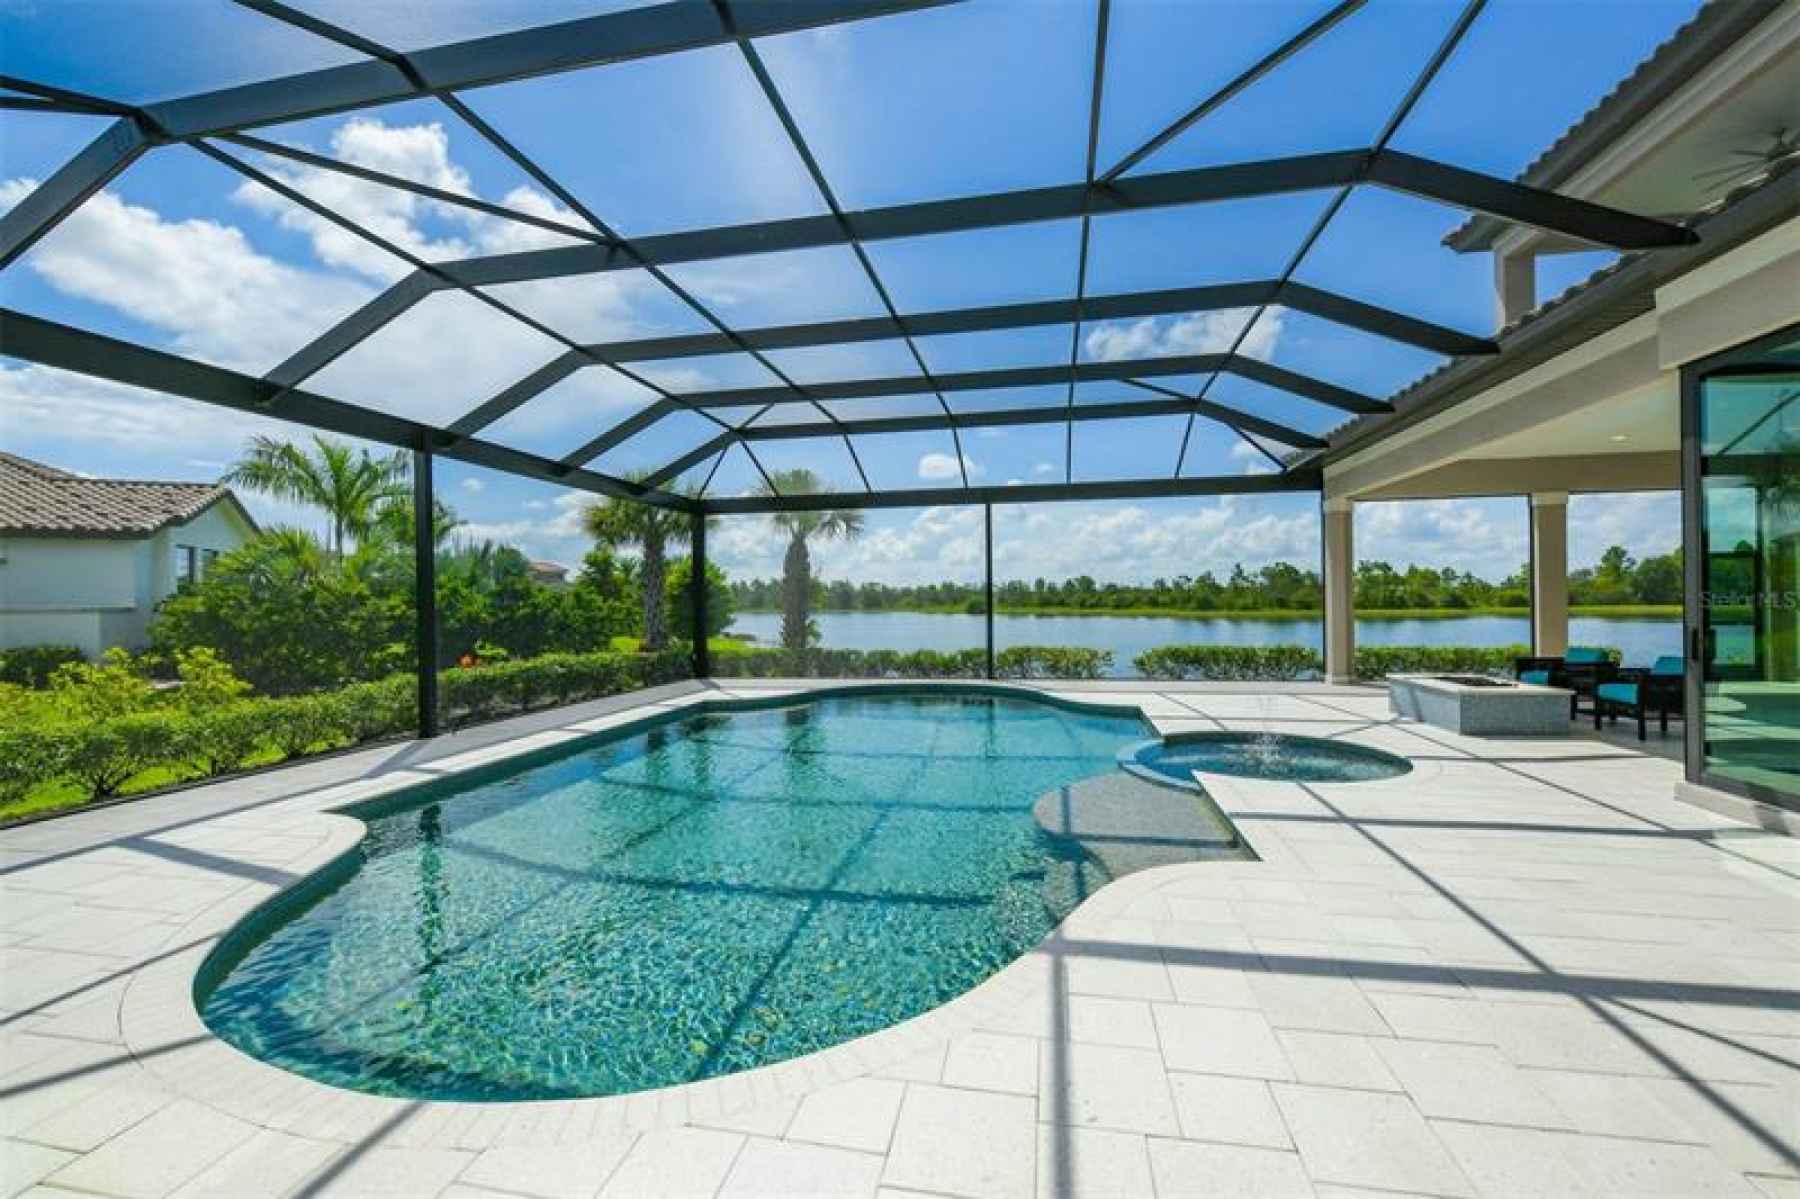 Heated pool & spa with sun shelf with panoramic screens for open lake views